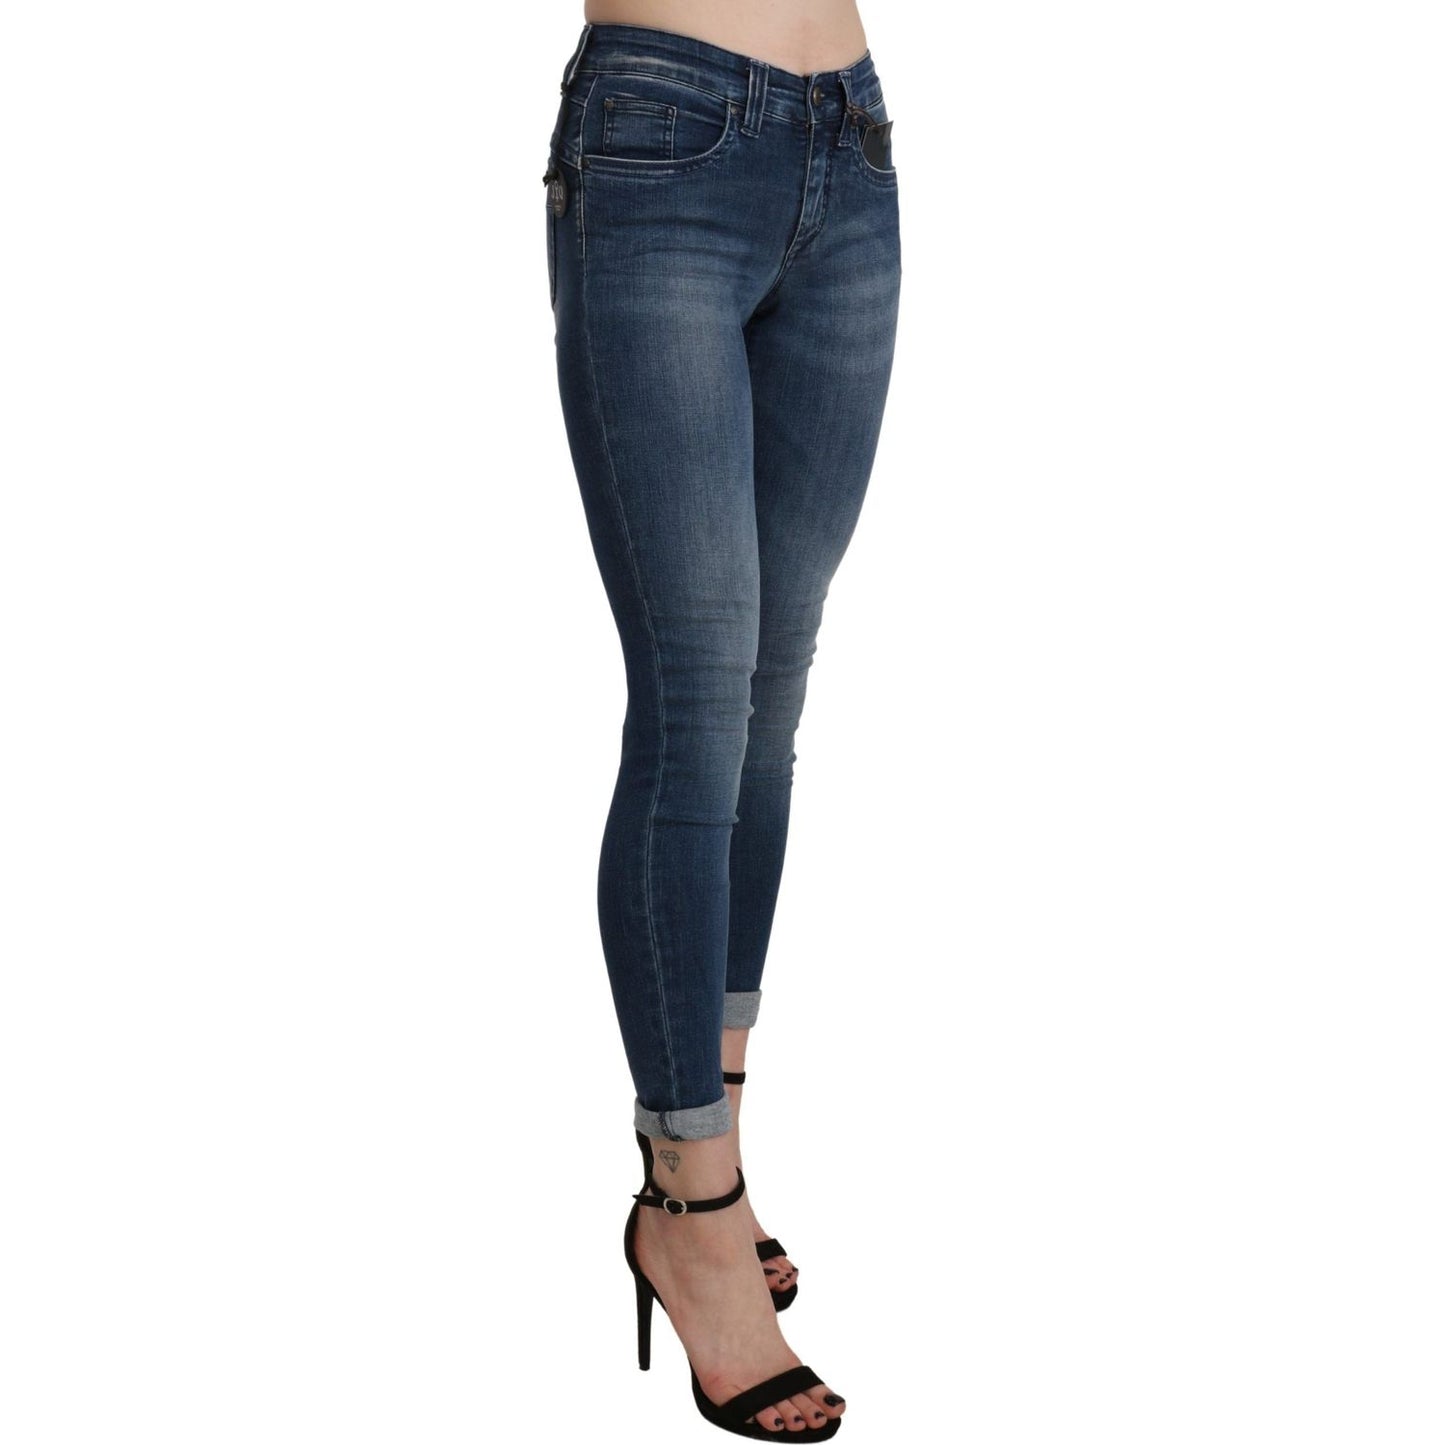 Ermanno Scervino Chic Blue High Waist Cropped Jeans blue-washed-high-waist-skinny-cropped-cotton-jeans